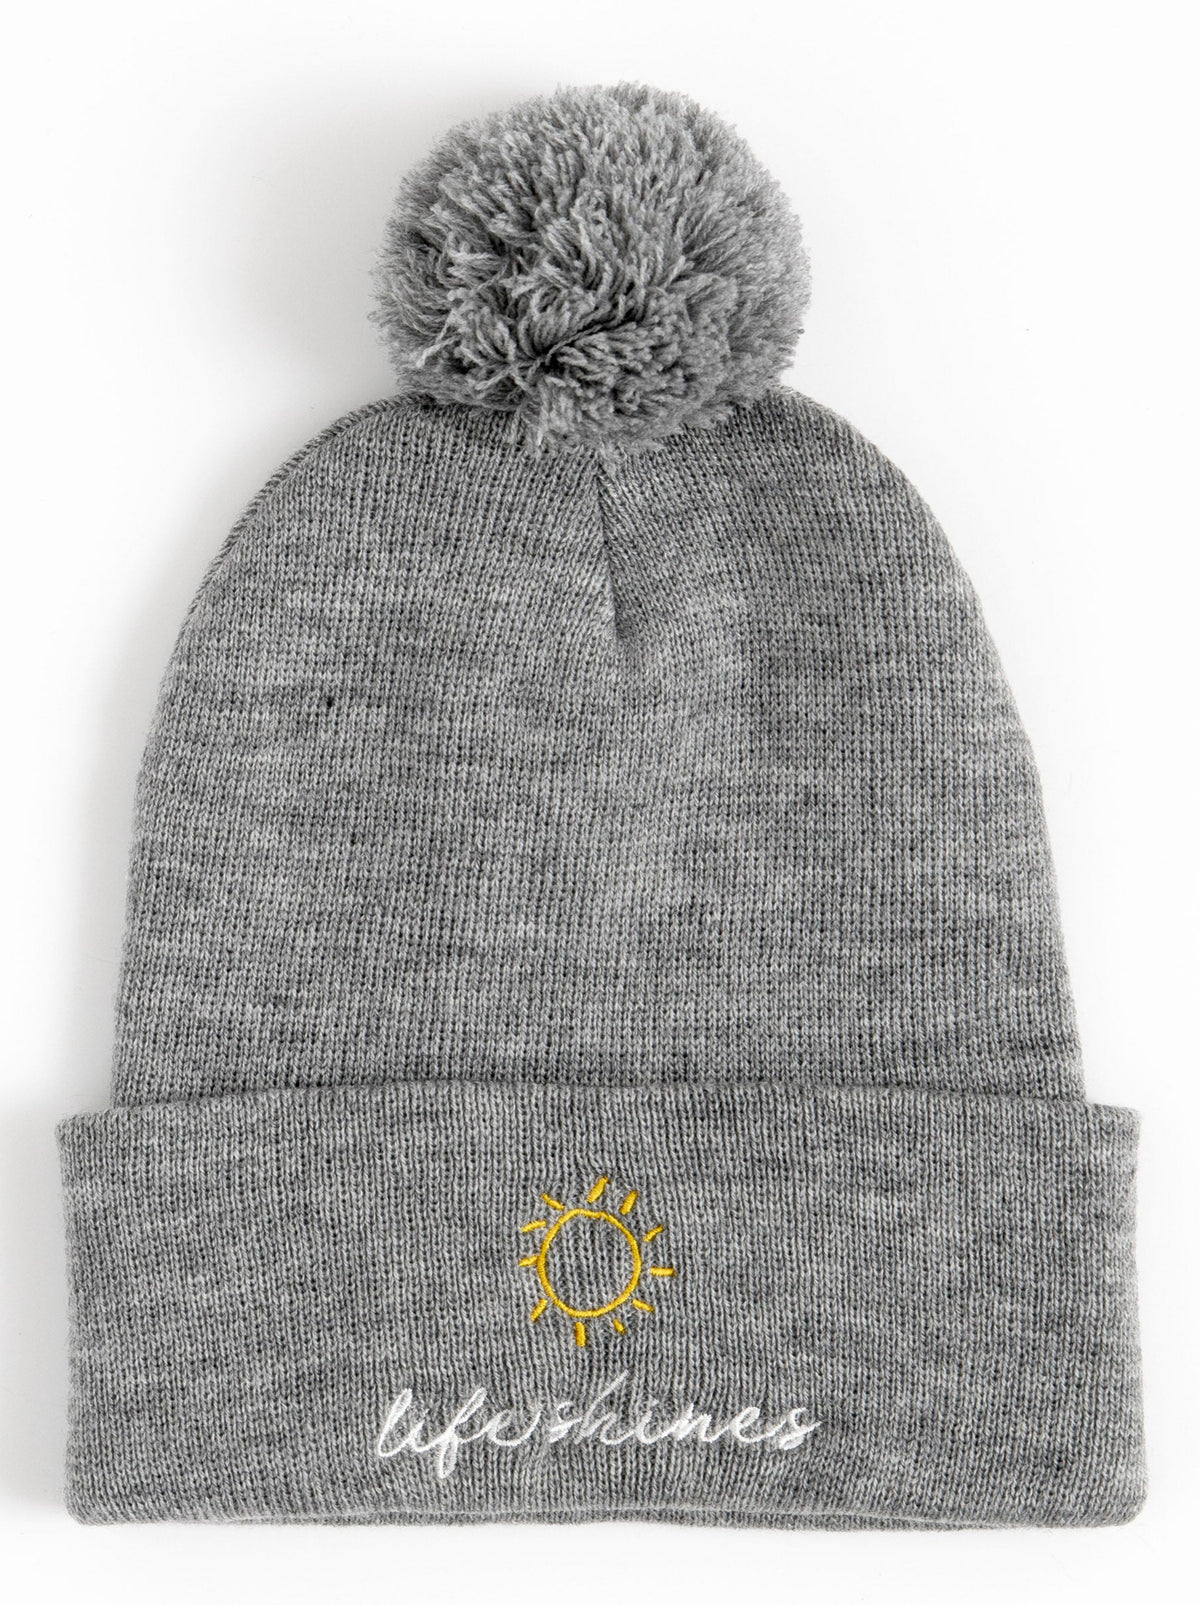 30A Life Shines Embroidered Beanie